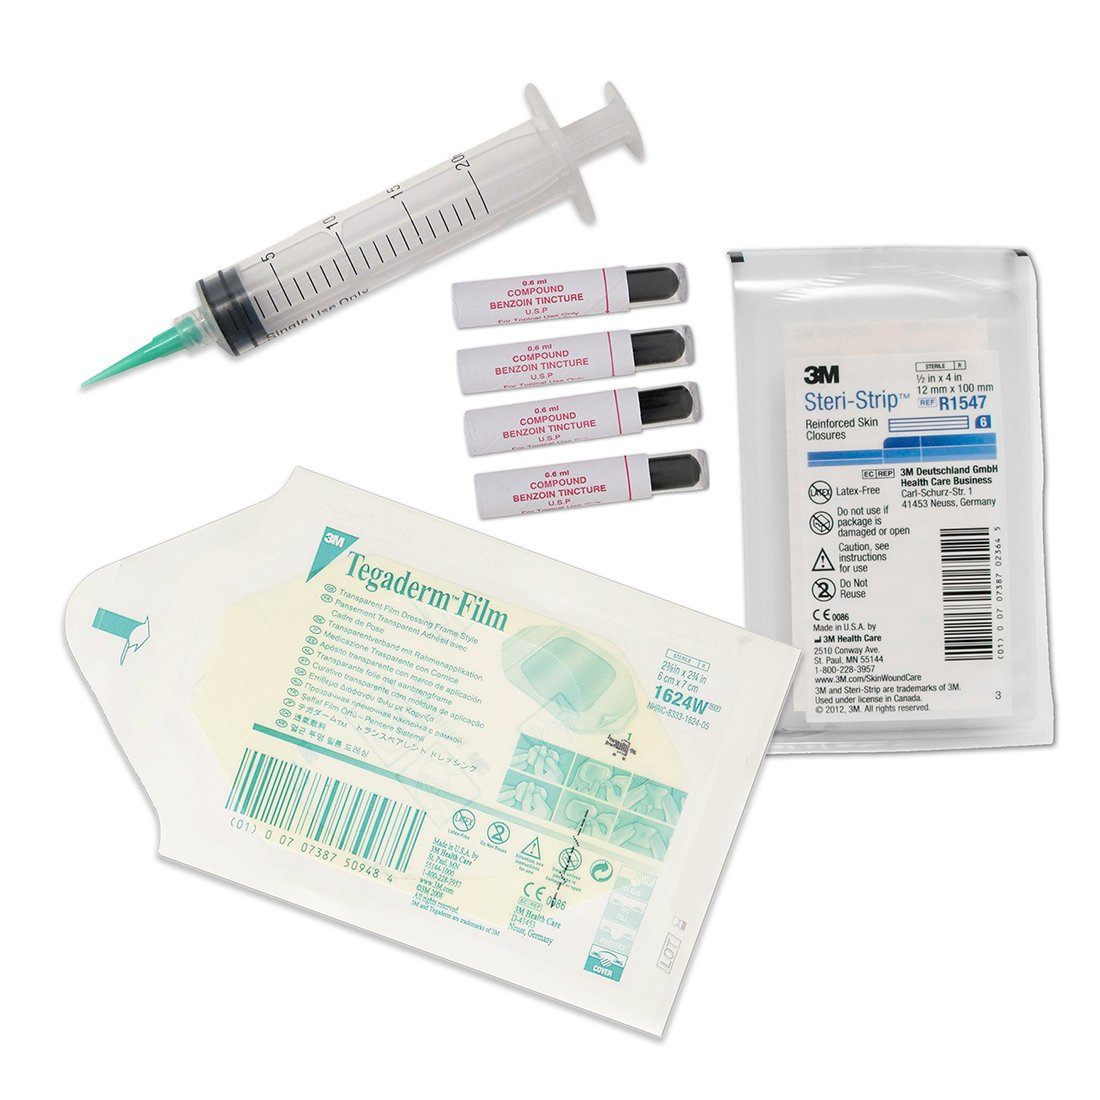 Wound Closure (REFILL KIT) - The First Aid Gear Shop